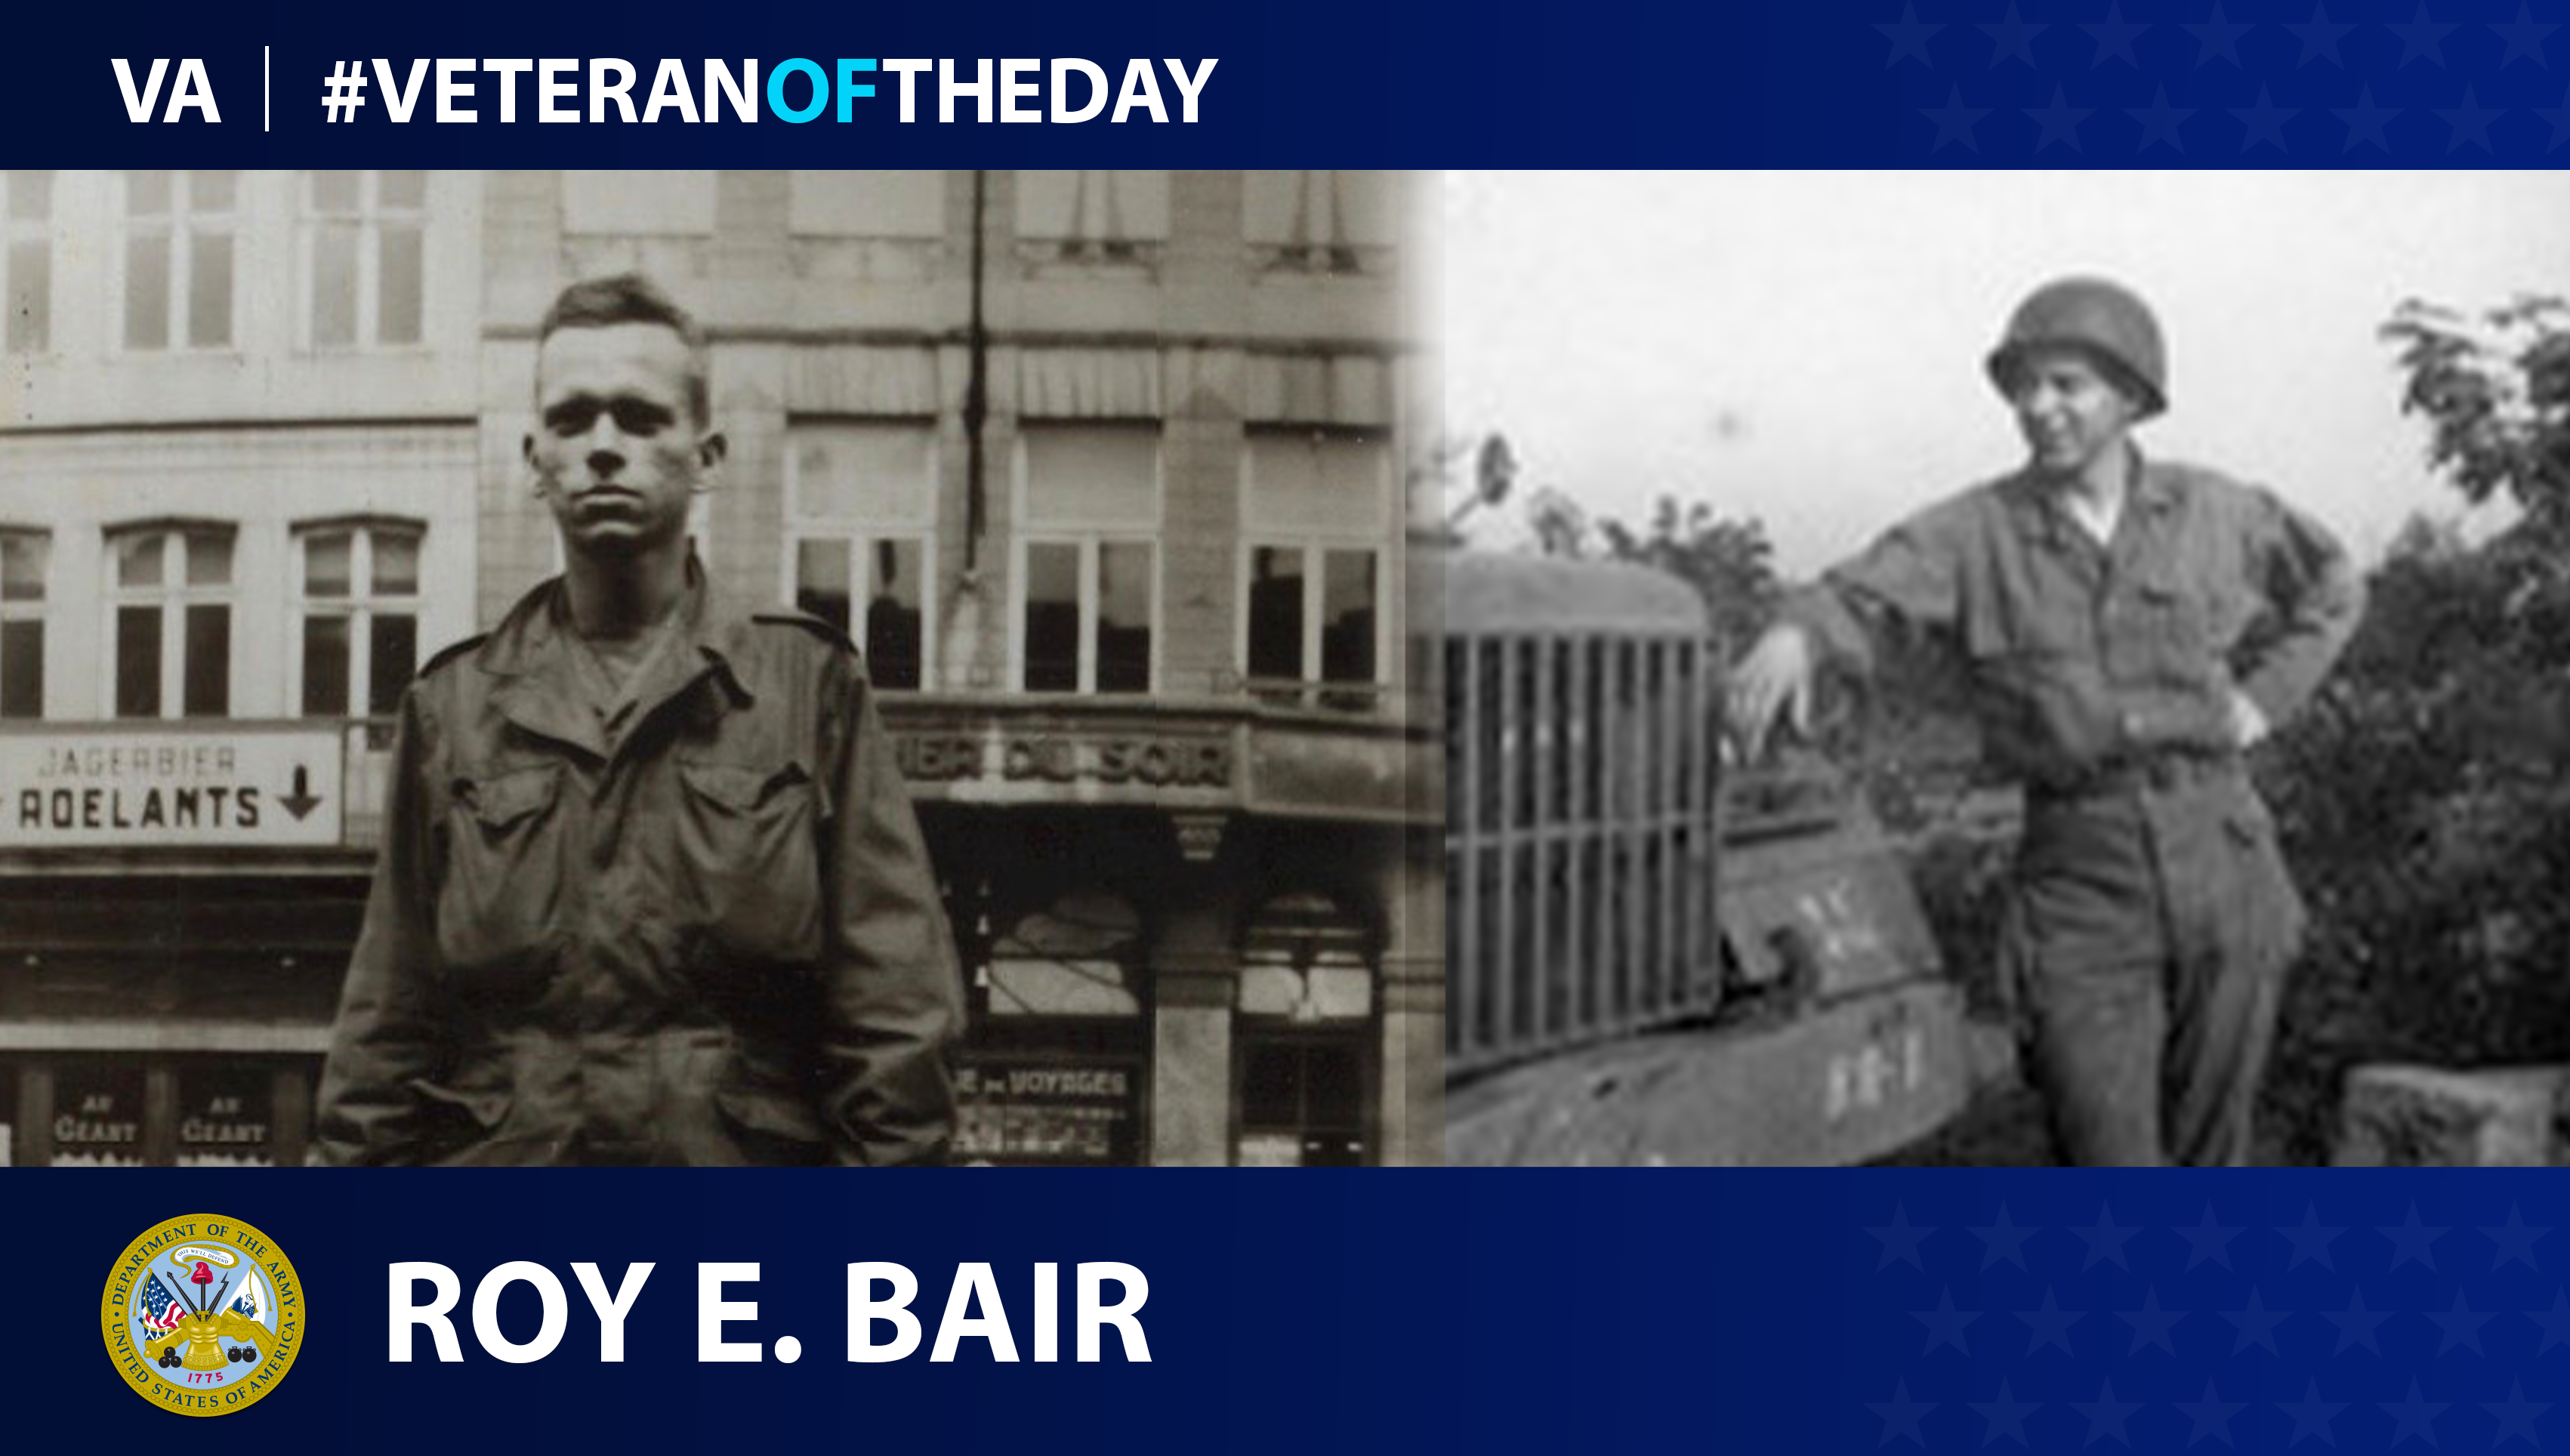 Army Veteran Roy E. Bair is today's Veteran of the Day.